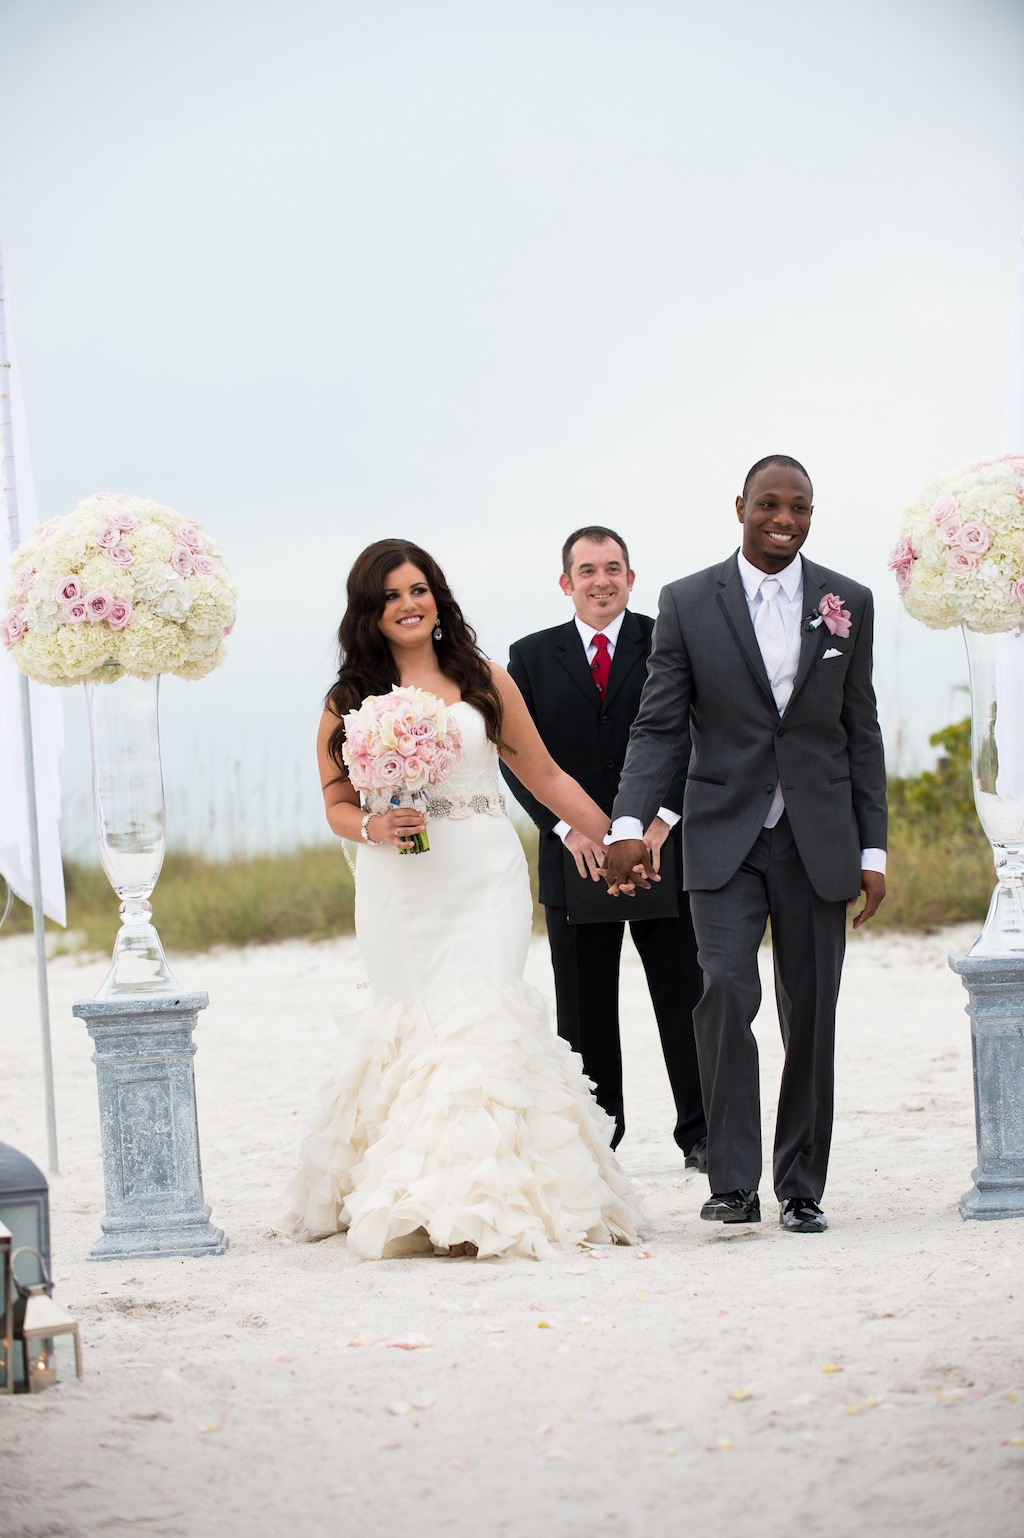 Post Card Inn Wedding St. Pete Beach - In True Colors Photography - Pink, Ivory and White Beachfront Nigerian Wedding (27)